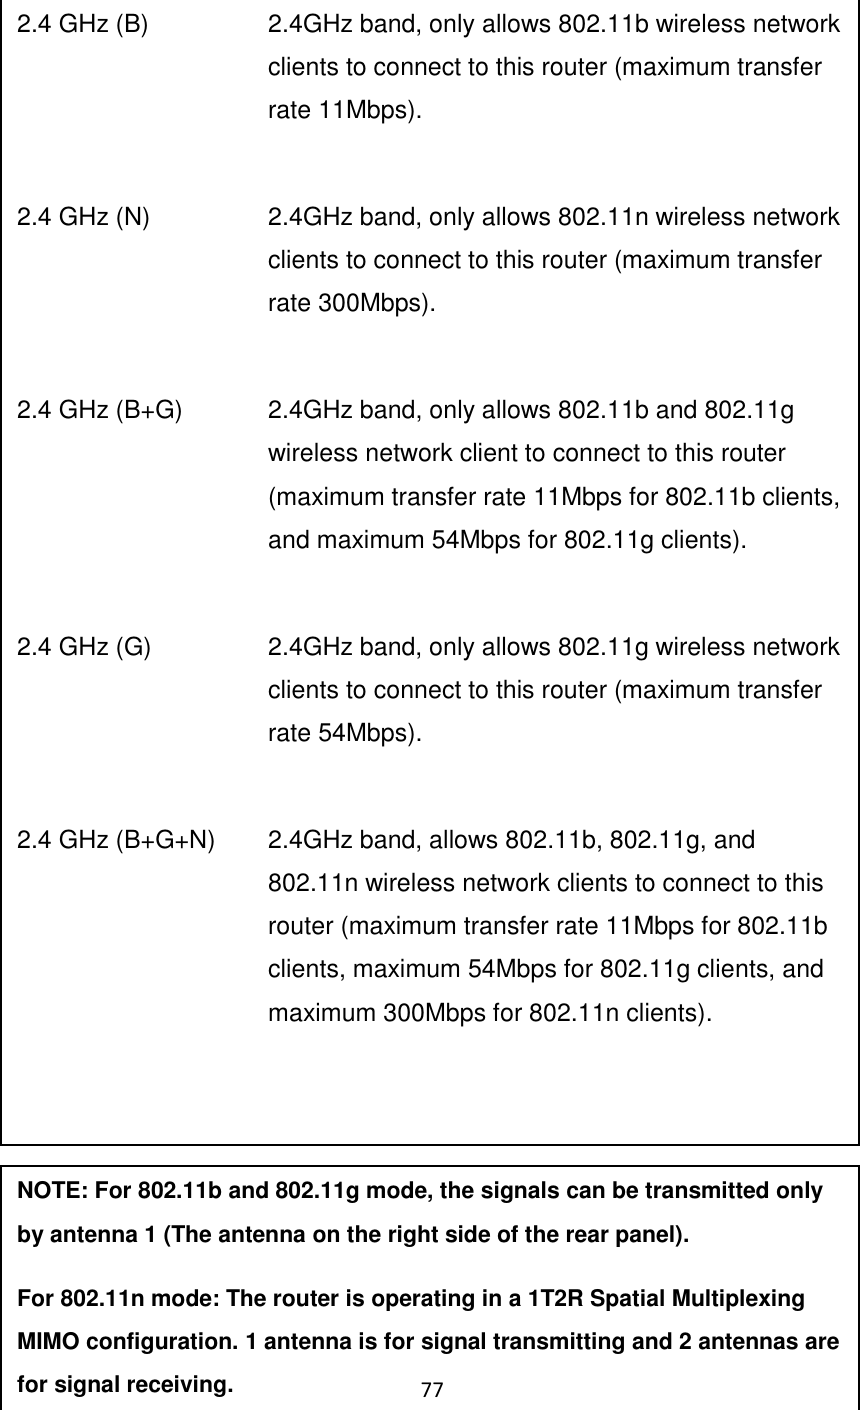 77                         NOTE: For 802.11b and 802.11g mode, the signals can be transmitted only by antenna 1 (The antenna on the right side of the rear panel).   For 802.11n mode: The router is operating in a 1T2R Spatial Multiplexing MIMO configuration. 1 antenna is for signal transmitting and 2 antennas are for signal receiving.  2.4 GHz (B)  2.4GHz band, only allows 802.11b wireless network clients to connect to this router (maximum transfer rate 11Mbps).  2.4 GHz (N)  2.4GHz band, only allows 802.11n wireless network clients to connect to this router (maximum transfer rate 300Mbps).  2.4 GHz (B+G)    2.4GHz band, only allows 802.11b and 802.11g wireless network client to connect to this router (maximum transfer rate 11Mbps for 802.11b clients, and maximum 54Mbps for 802.11g clients).  2.4 GHz (G)    2.4GHz band, only allows 802.11g wireless network clients to connect to this router (maximum transfer rate 54Mbps).  2.4 GHz (B+G+N)    2.4GHz band, allows 802.11b, 802.11g, and 802.11n wireless network clients to connect to this router (maximum transfer rate 11Mbps for 802.11b clients, maximum 54Mbps for 802.11g clients, and maximum 300Mbps for 802.11n clients). 